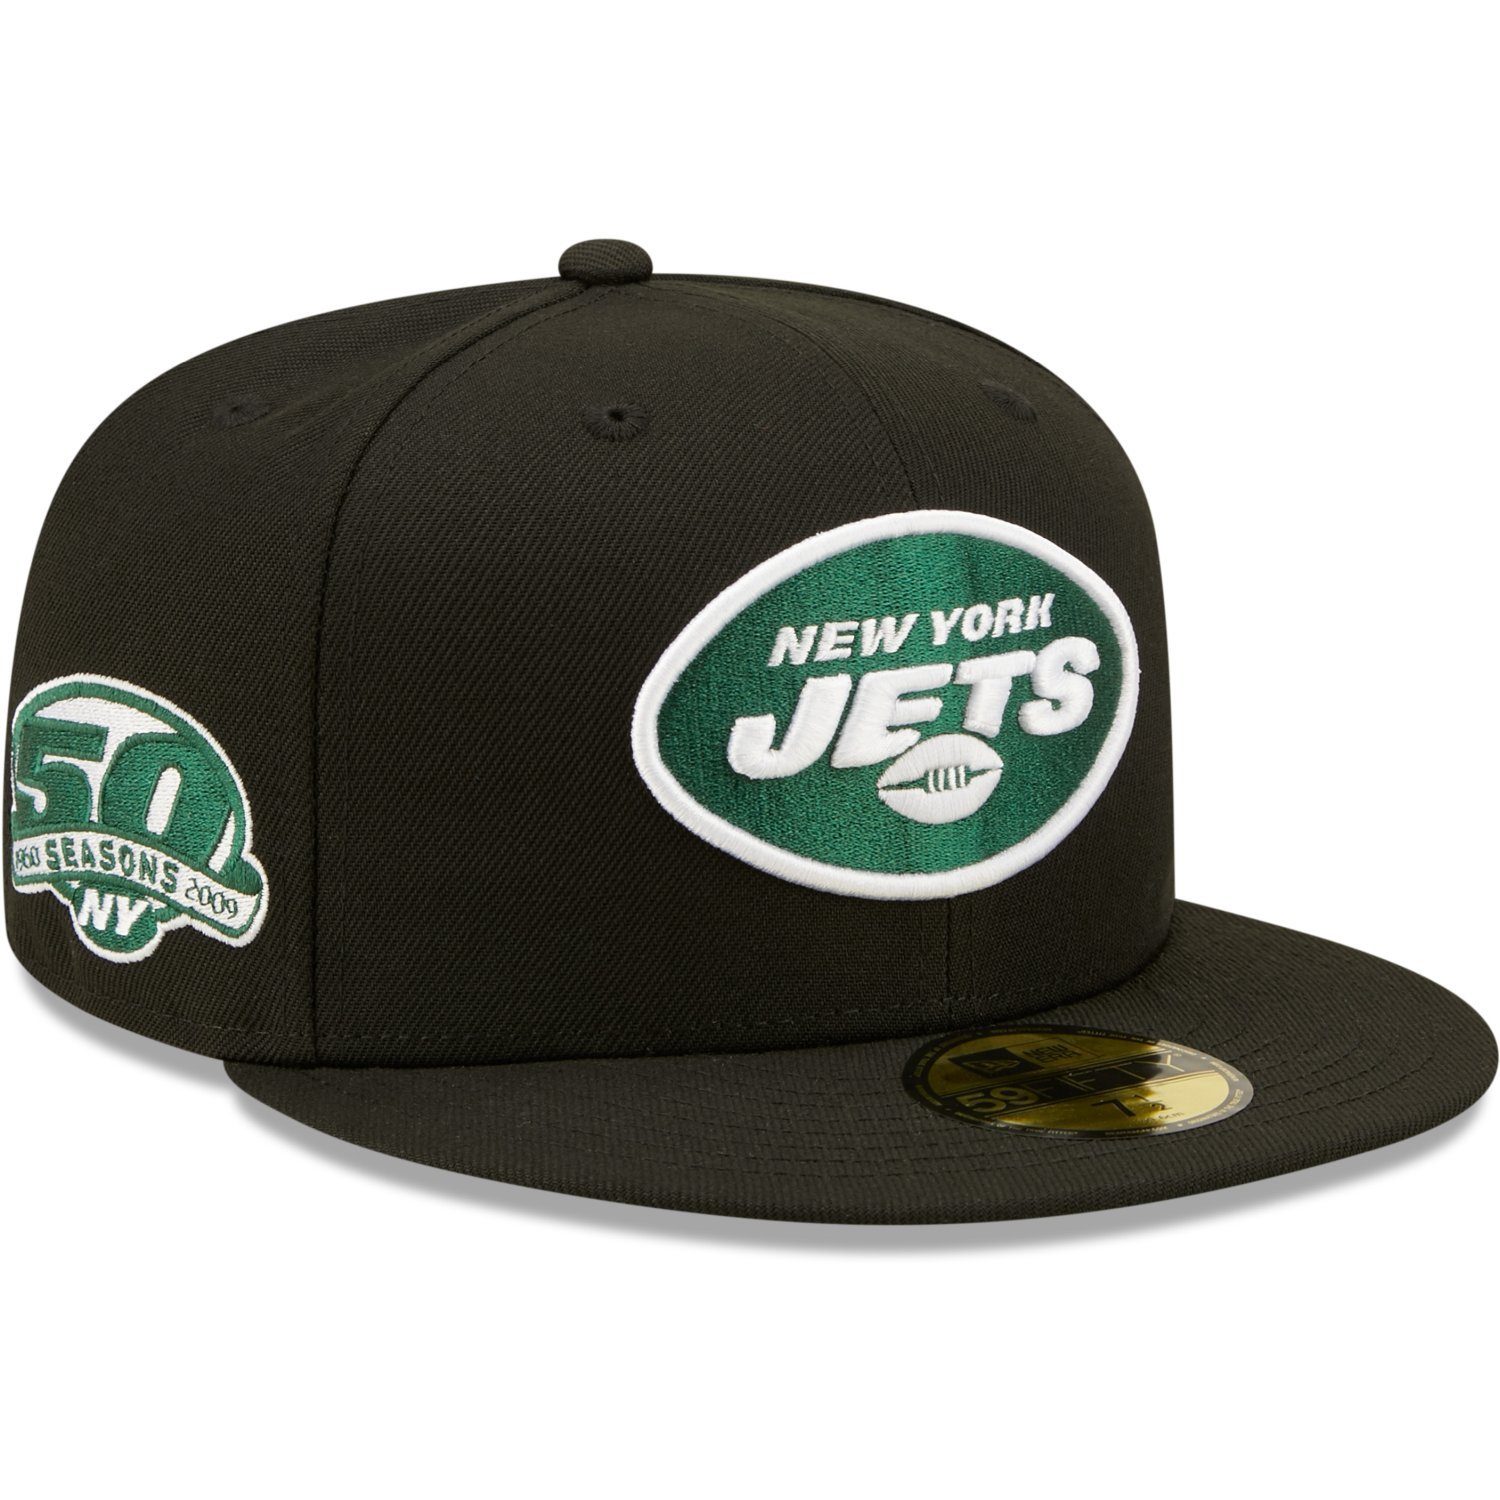 New Era Fitted Cap 59Fifty New York Jets 50 Seasons